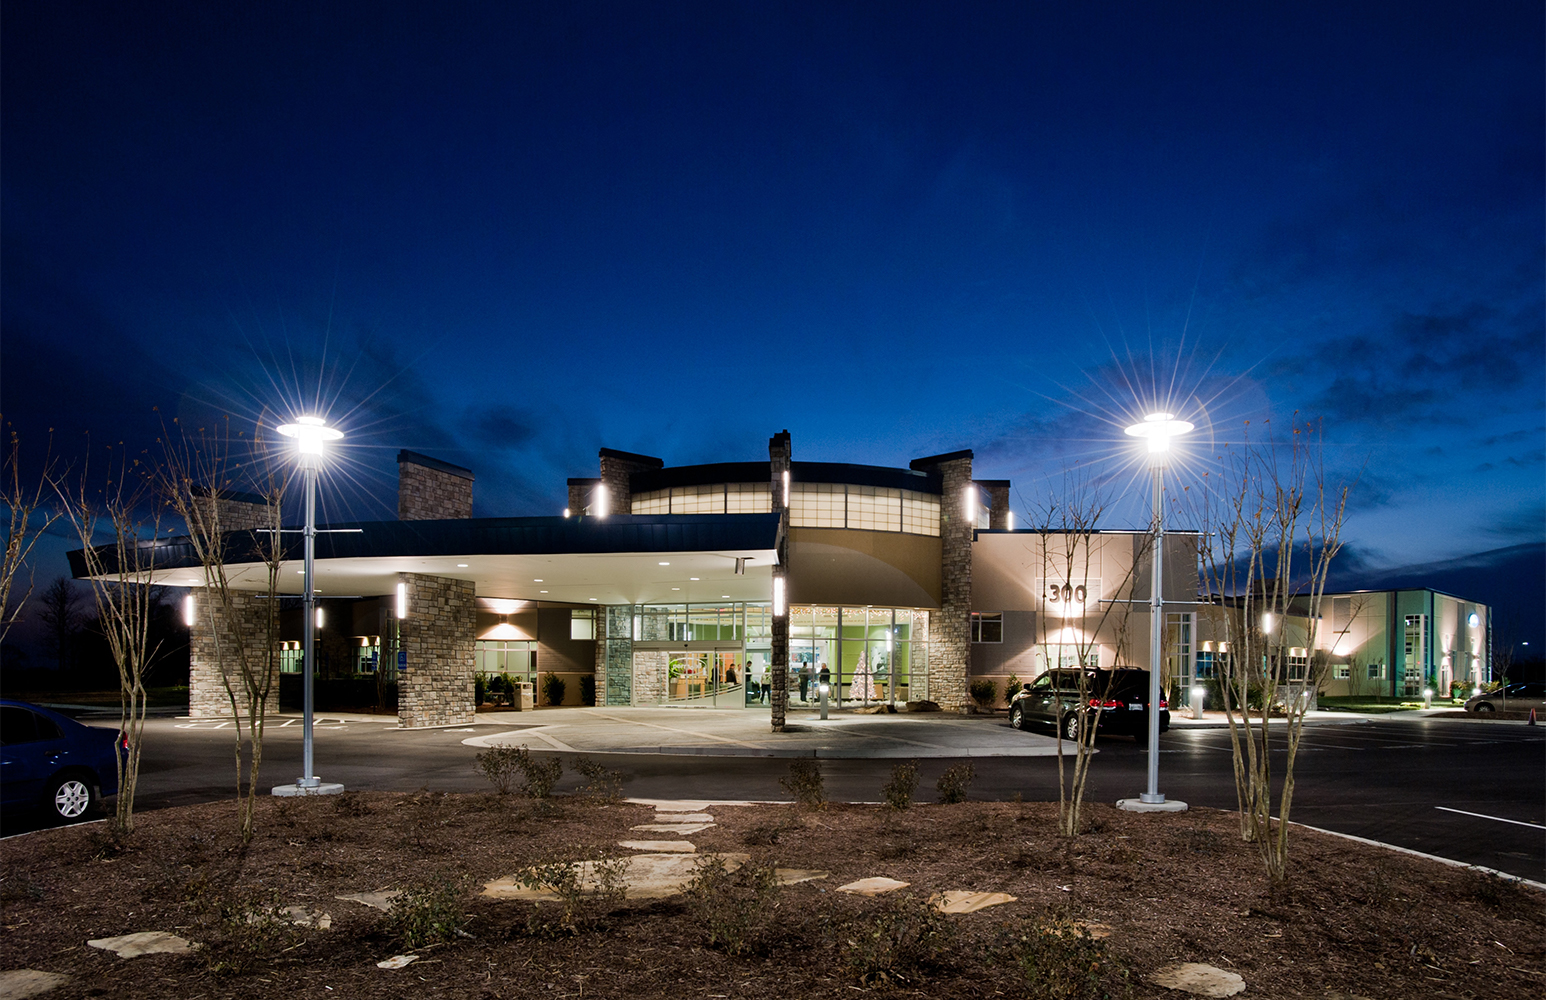 Avatar exterior lighting fixtures on a healthcare building illuminate support columns with clean, even light.